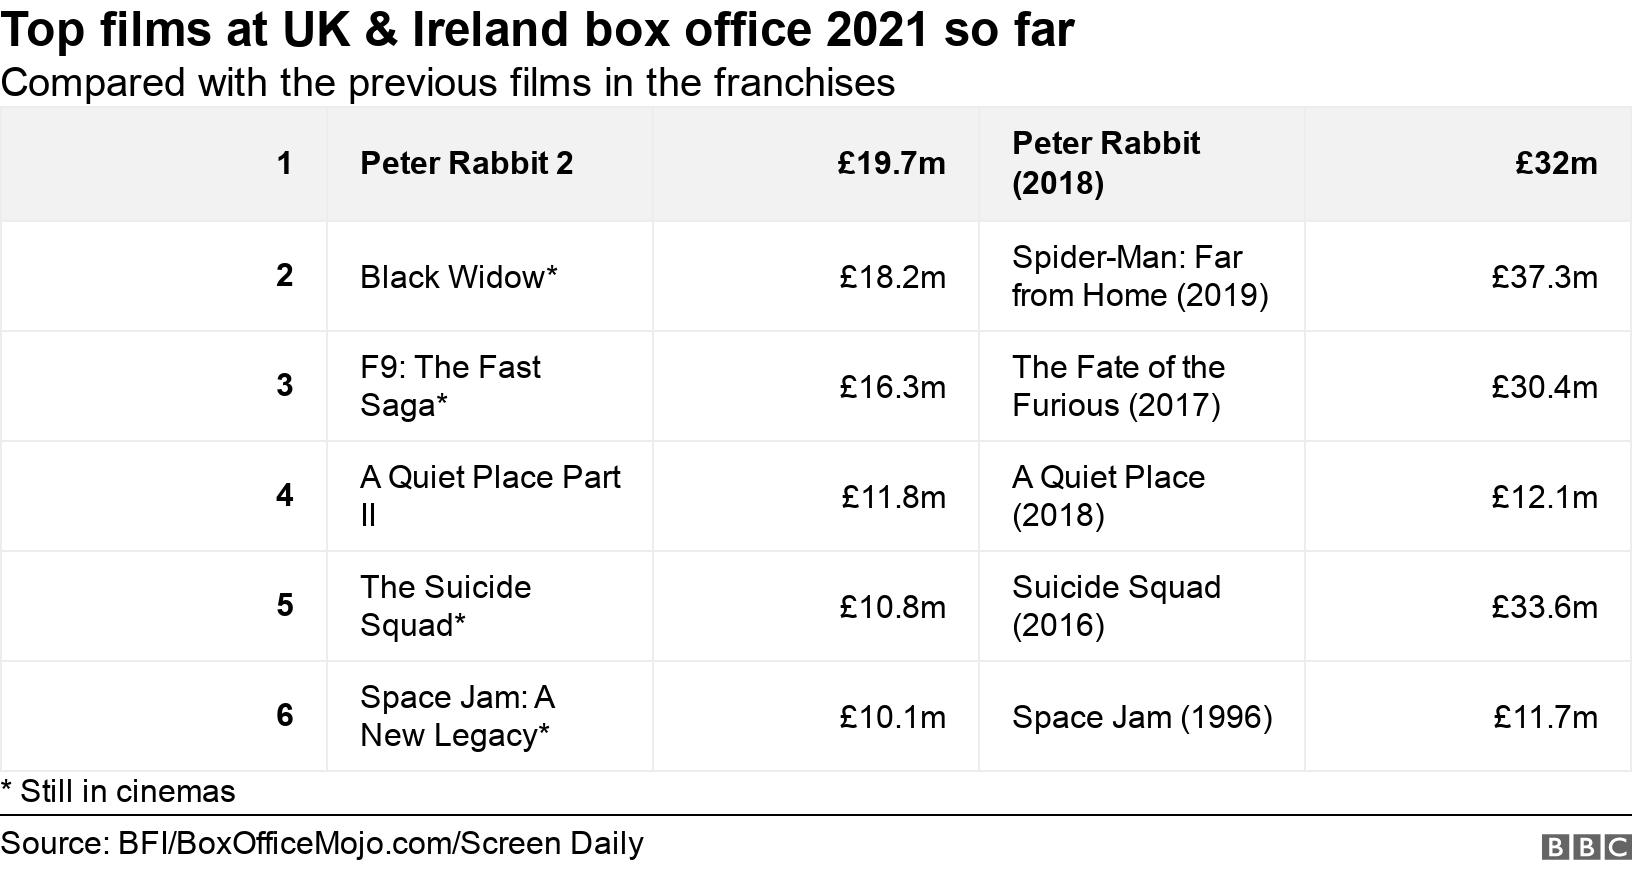 Cinema box office takings at 50% of pre-pandemic levels - BBC News